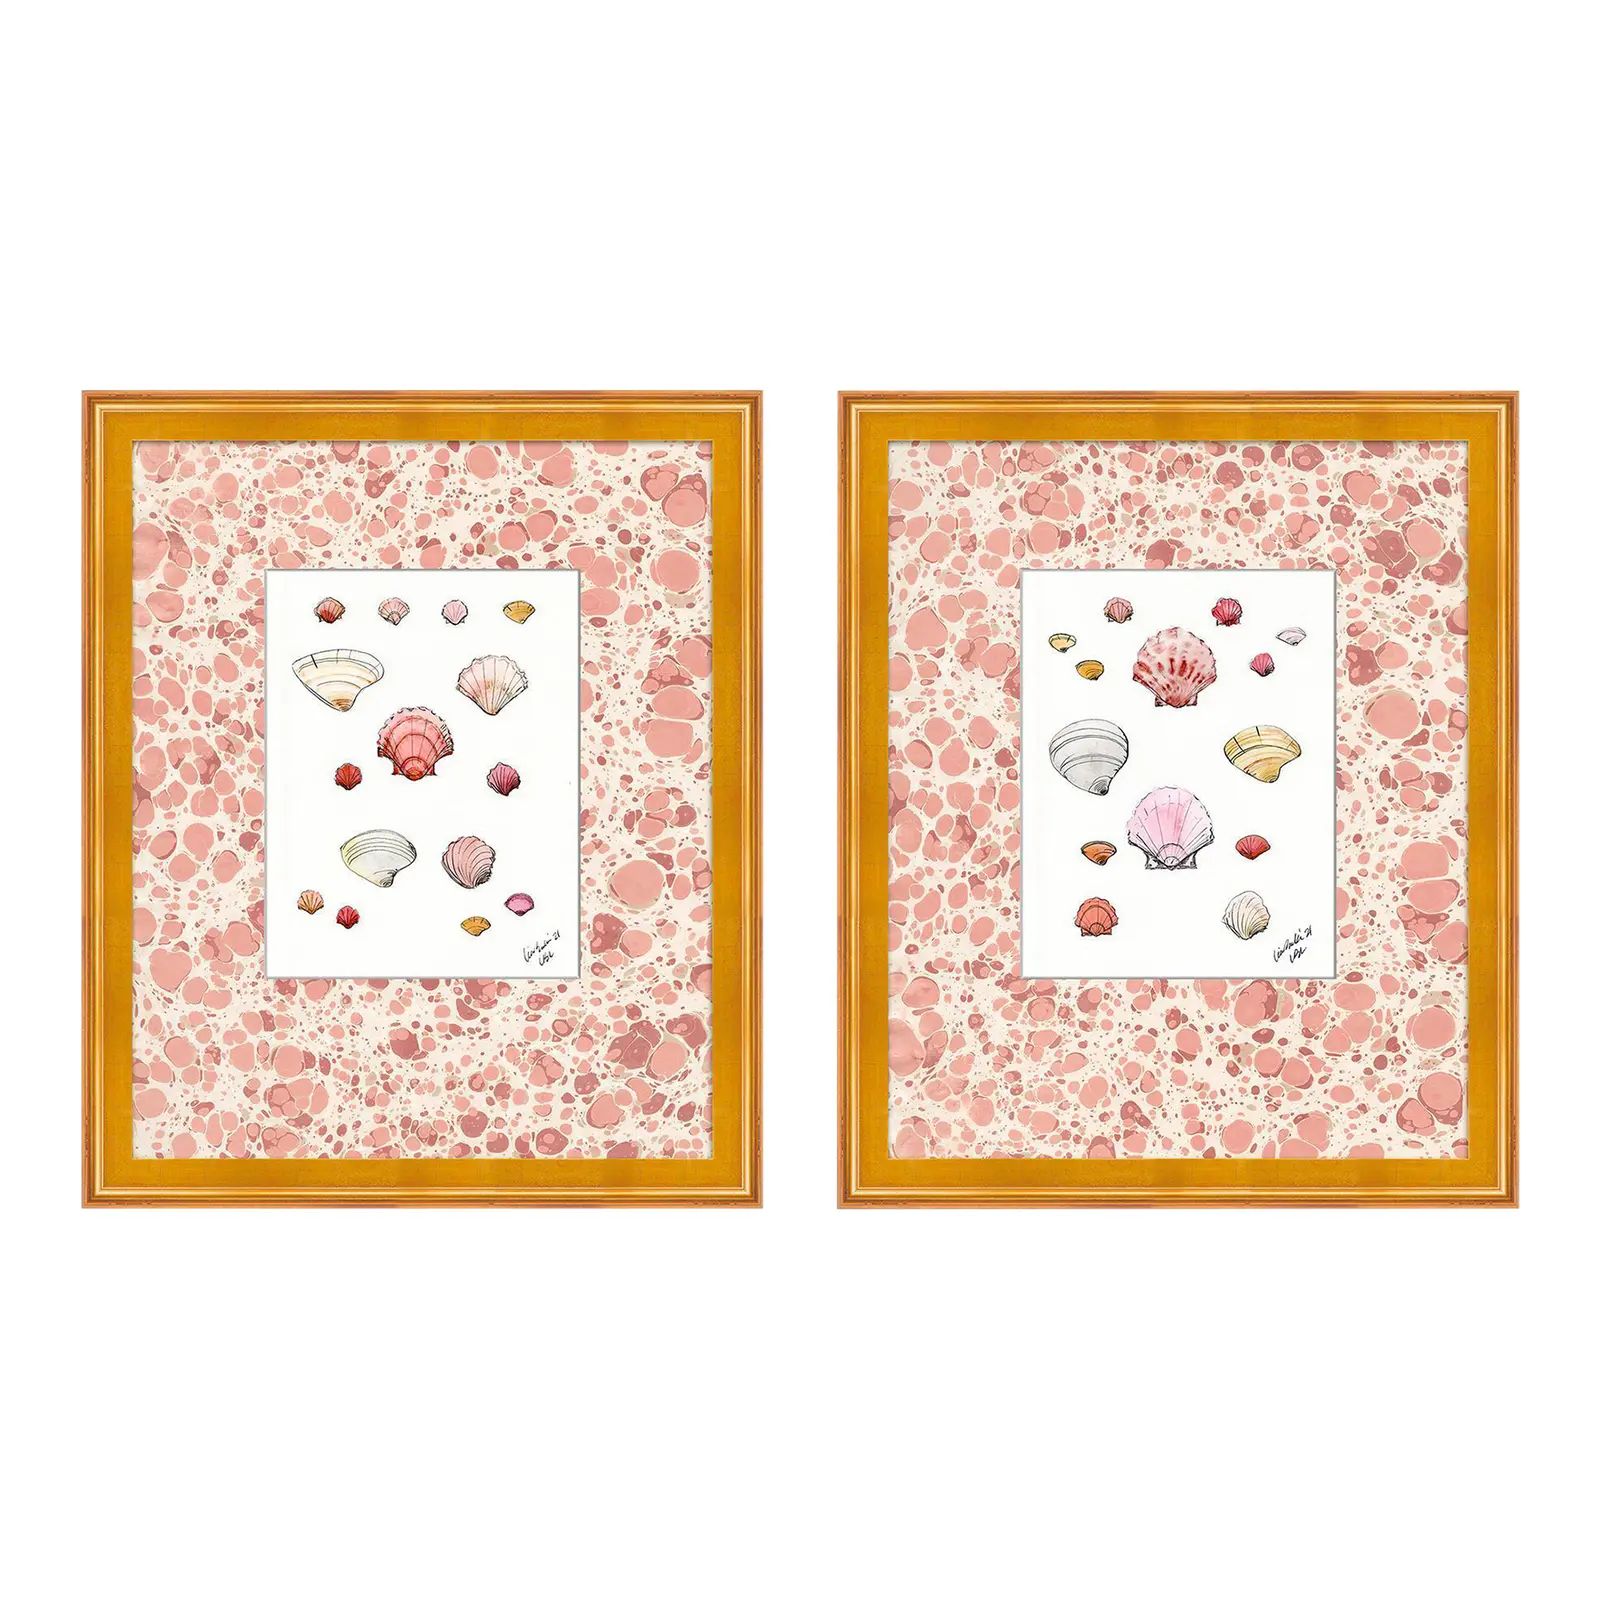 Marbled Shells in Pink, Diptych by Lia Burke Libaire in Gold Frame, Small Art Prints, Set of 2 | Chairish